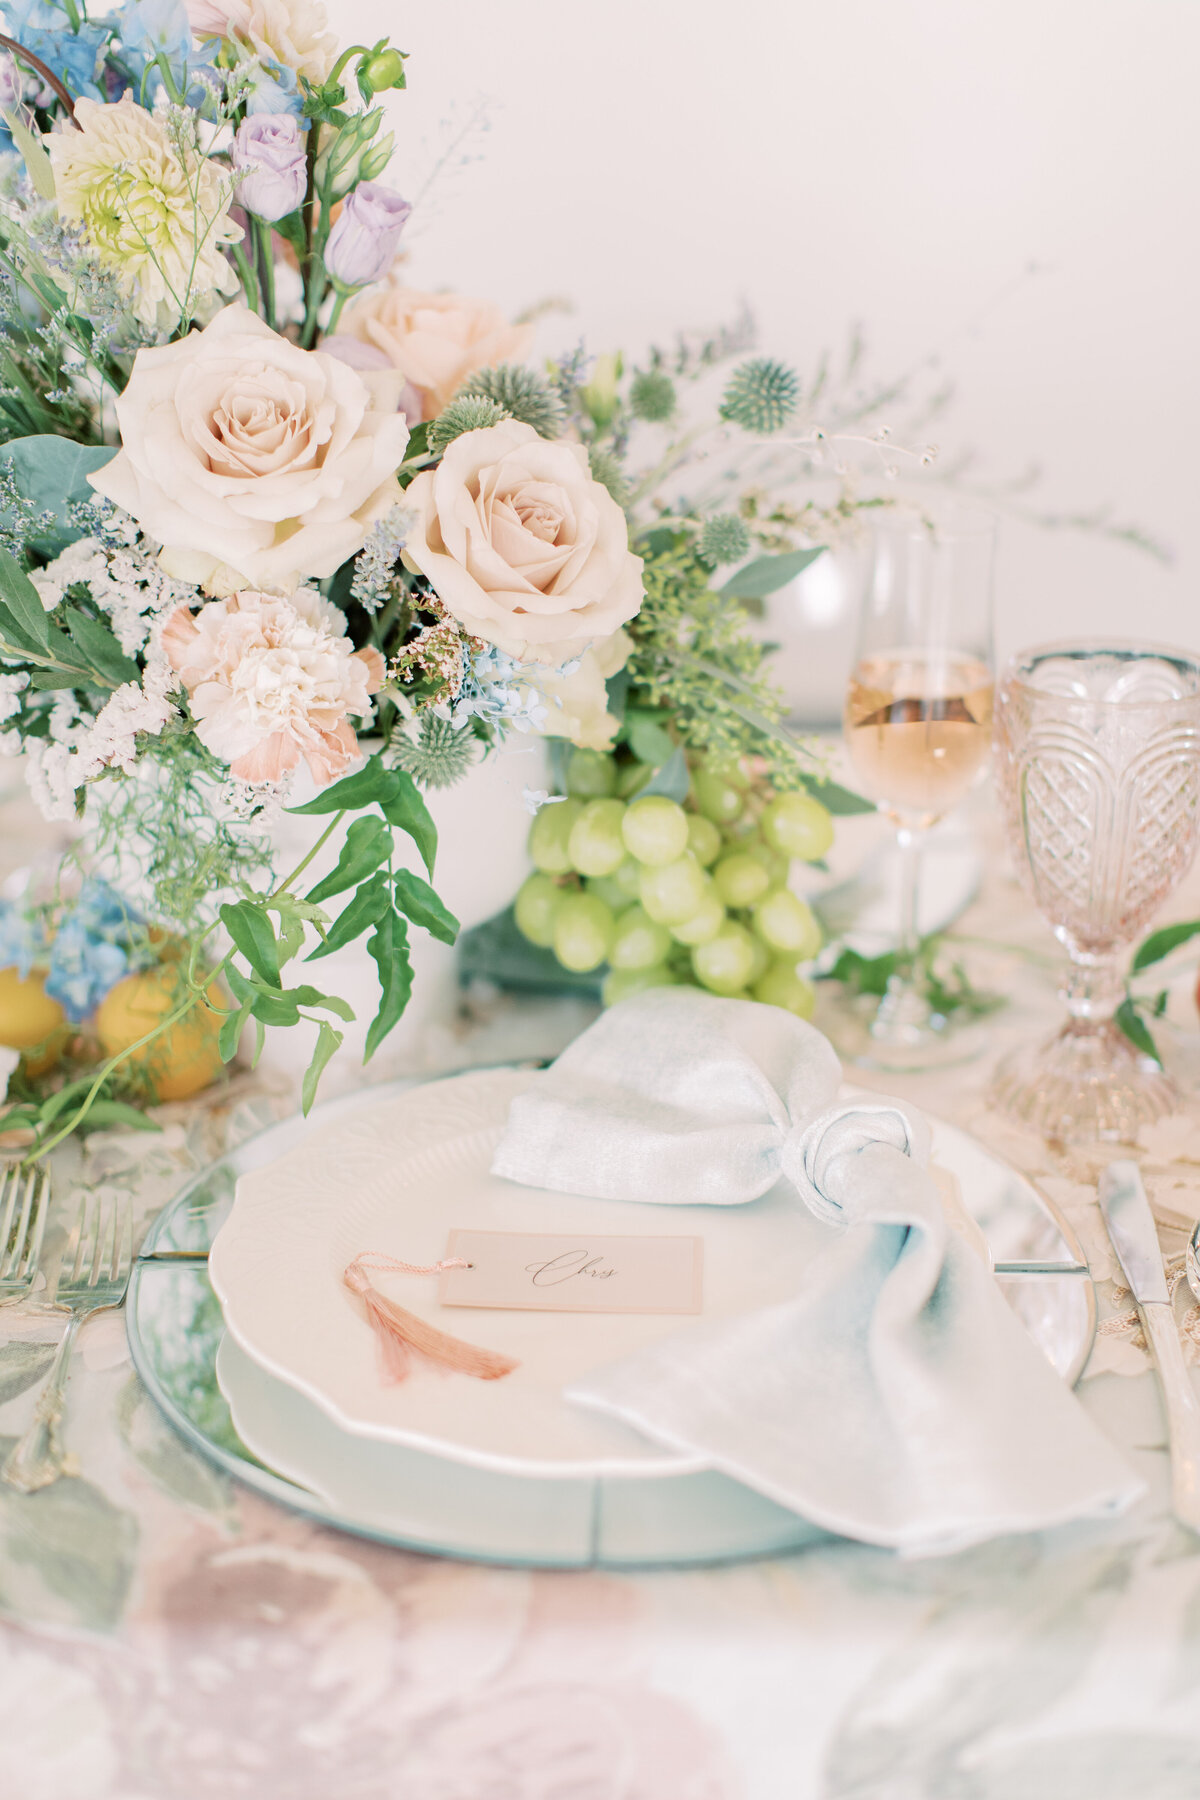 Inspiration for a dreamy tablescape for a light and airy wedding in Denver Colorado